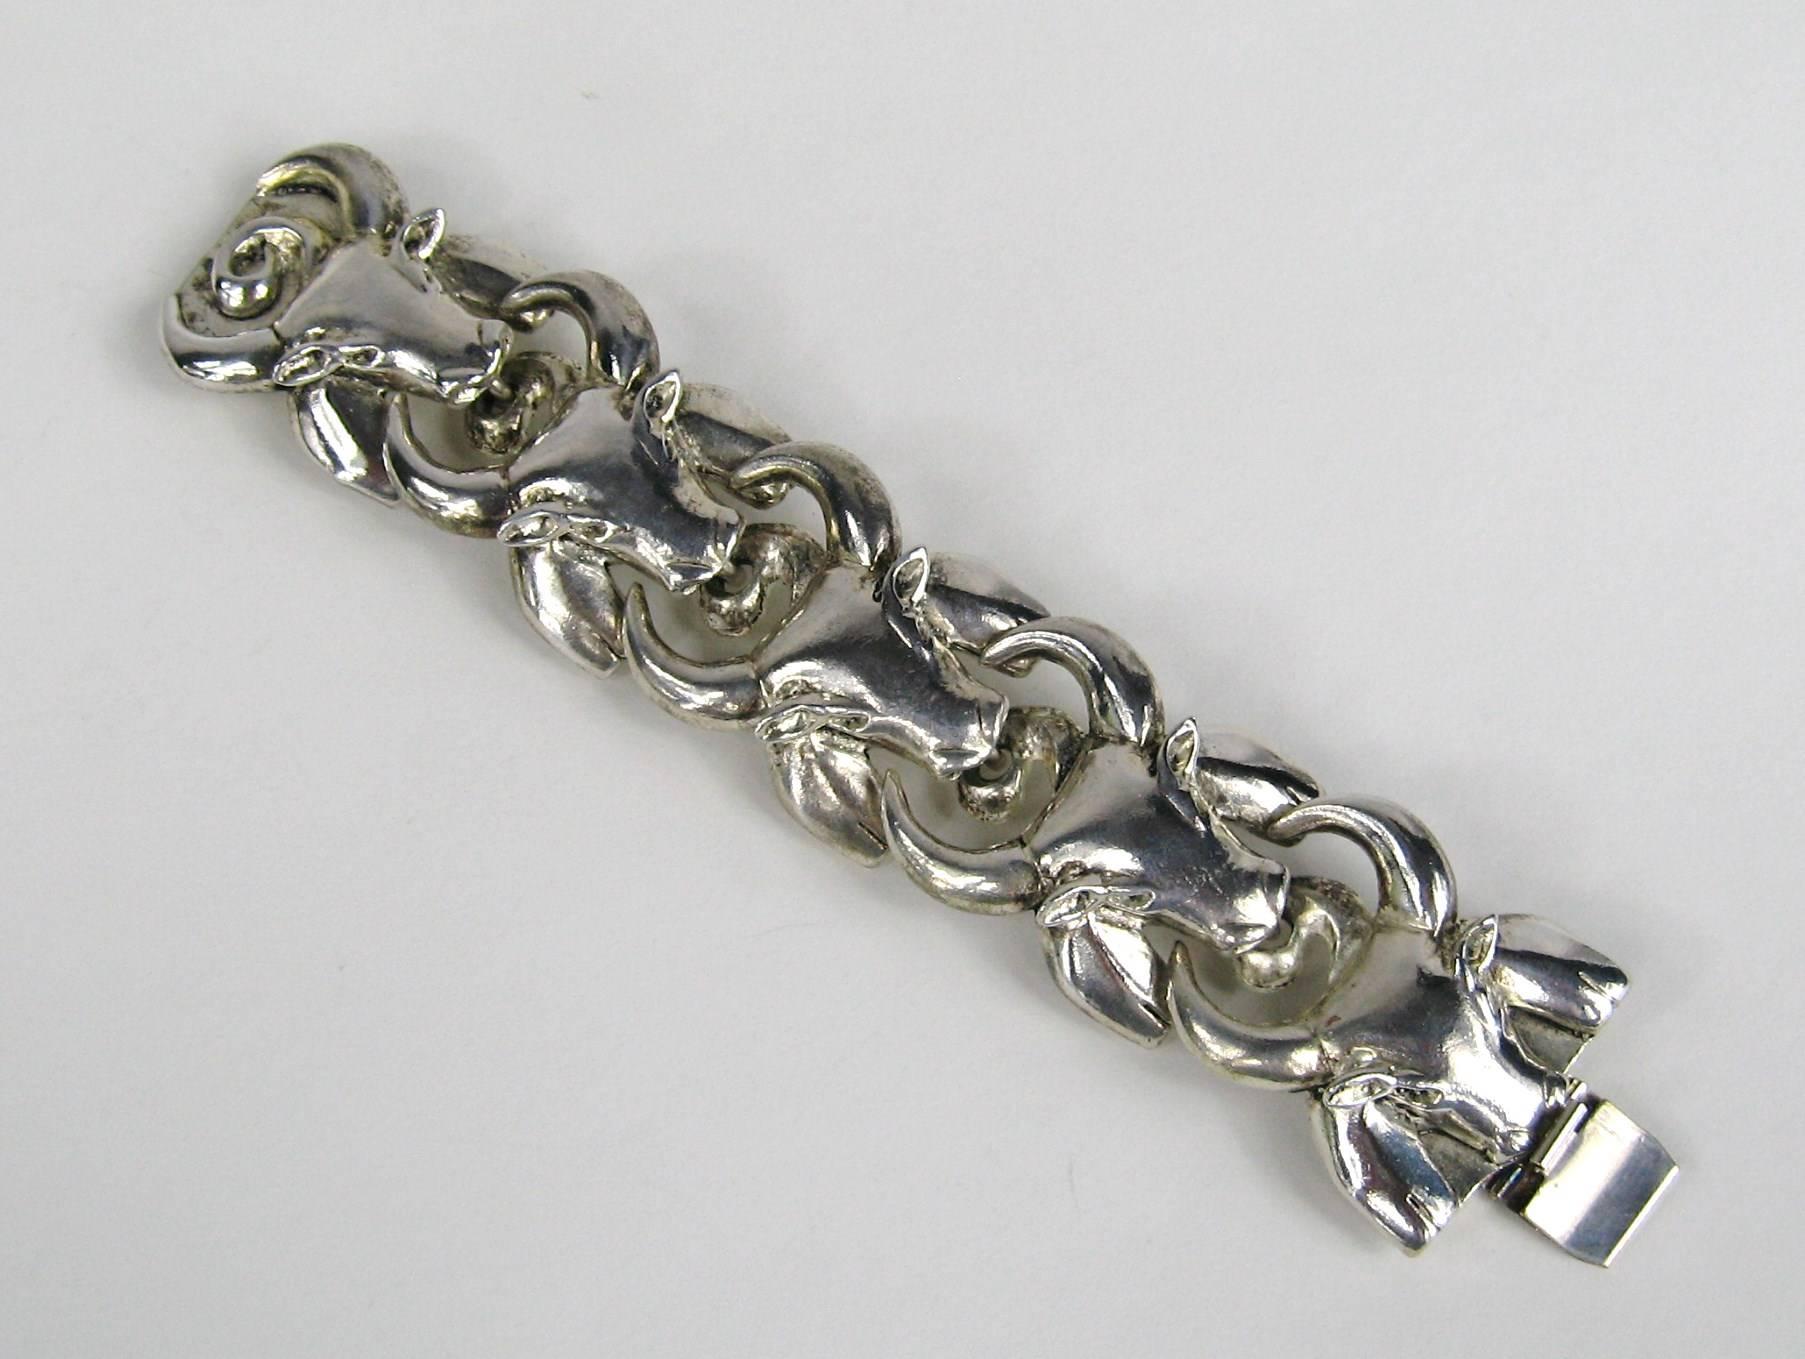 Sterling silver links made up as a Bulls face. Has 6 links. With a slide in clasp. Bracelet is New Old stock from the early 1990s, meaning Never Worn. will fit a 5.5 - 6.25 in.  wrist. It is 1.25